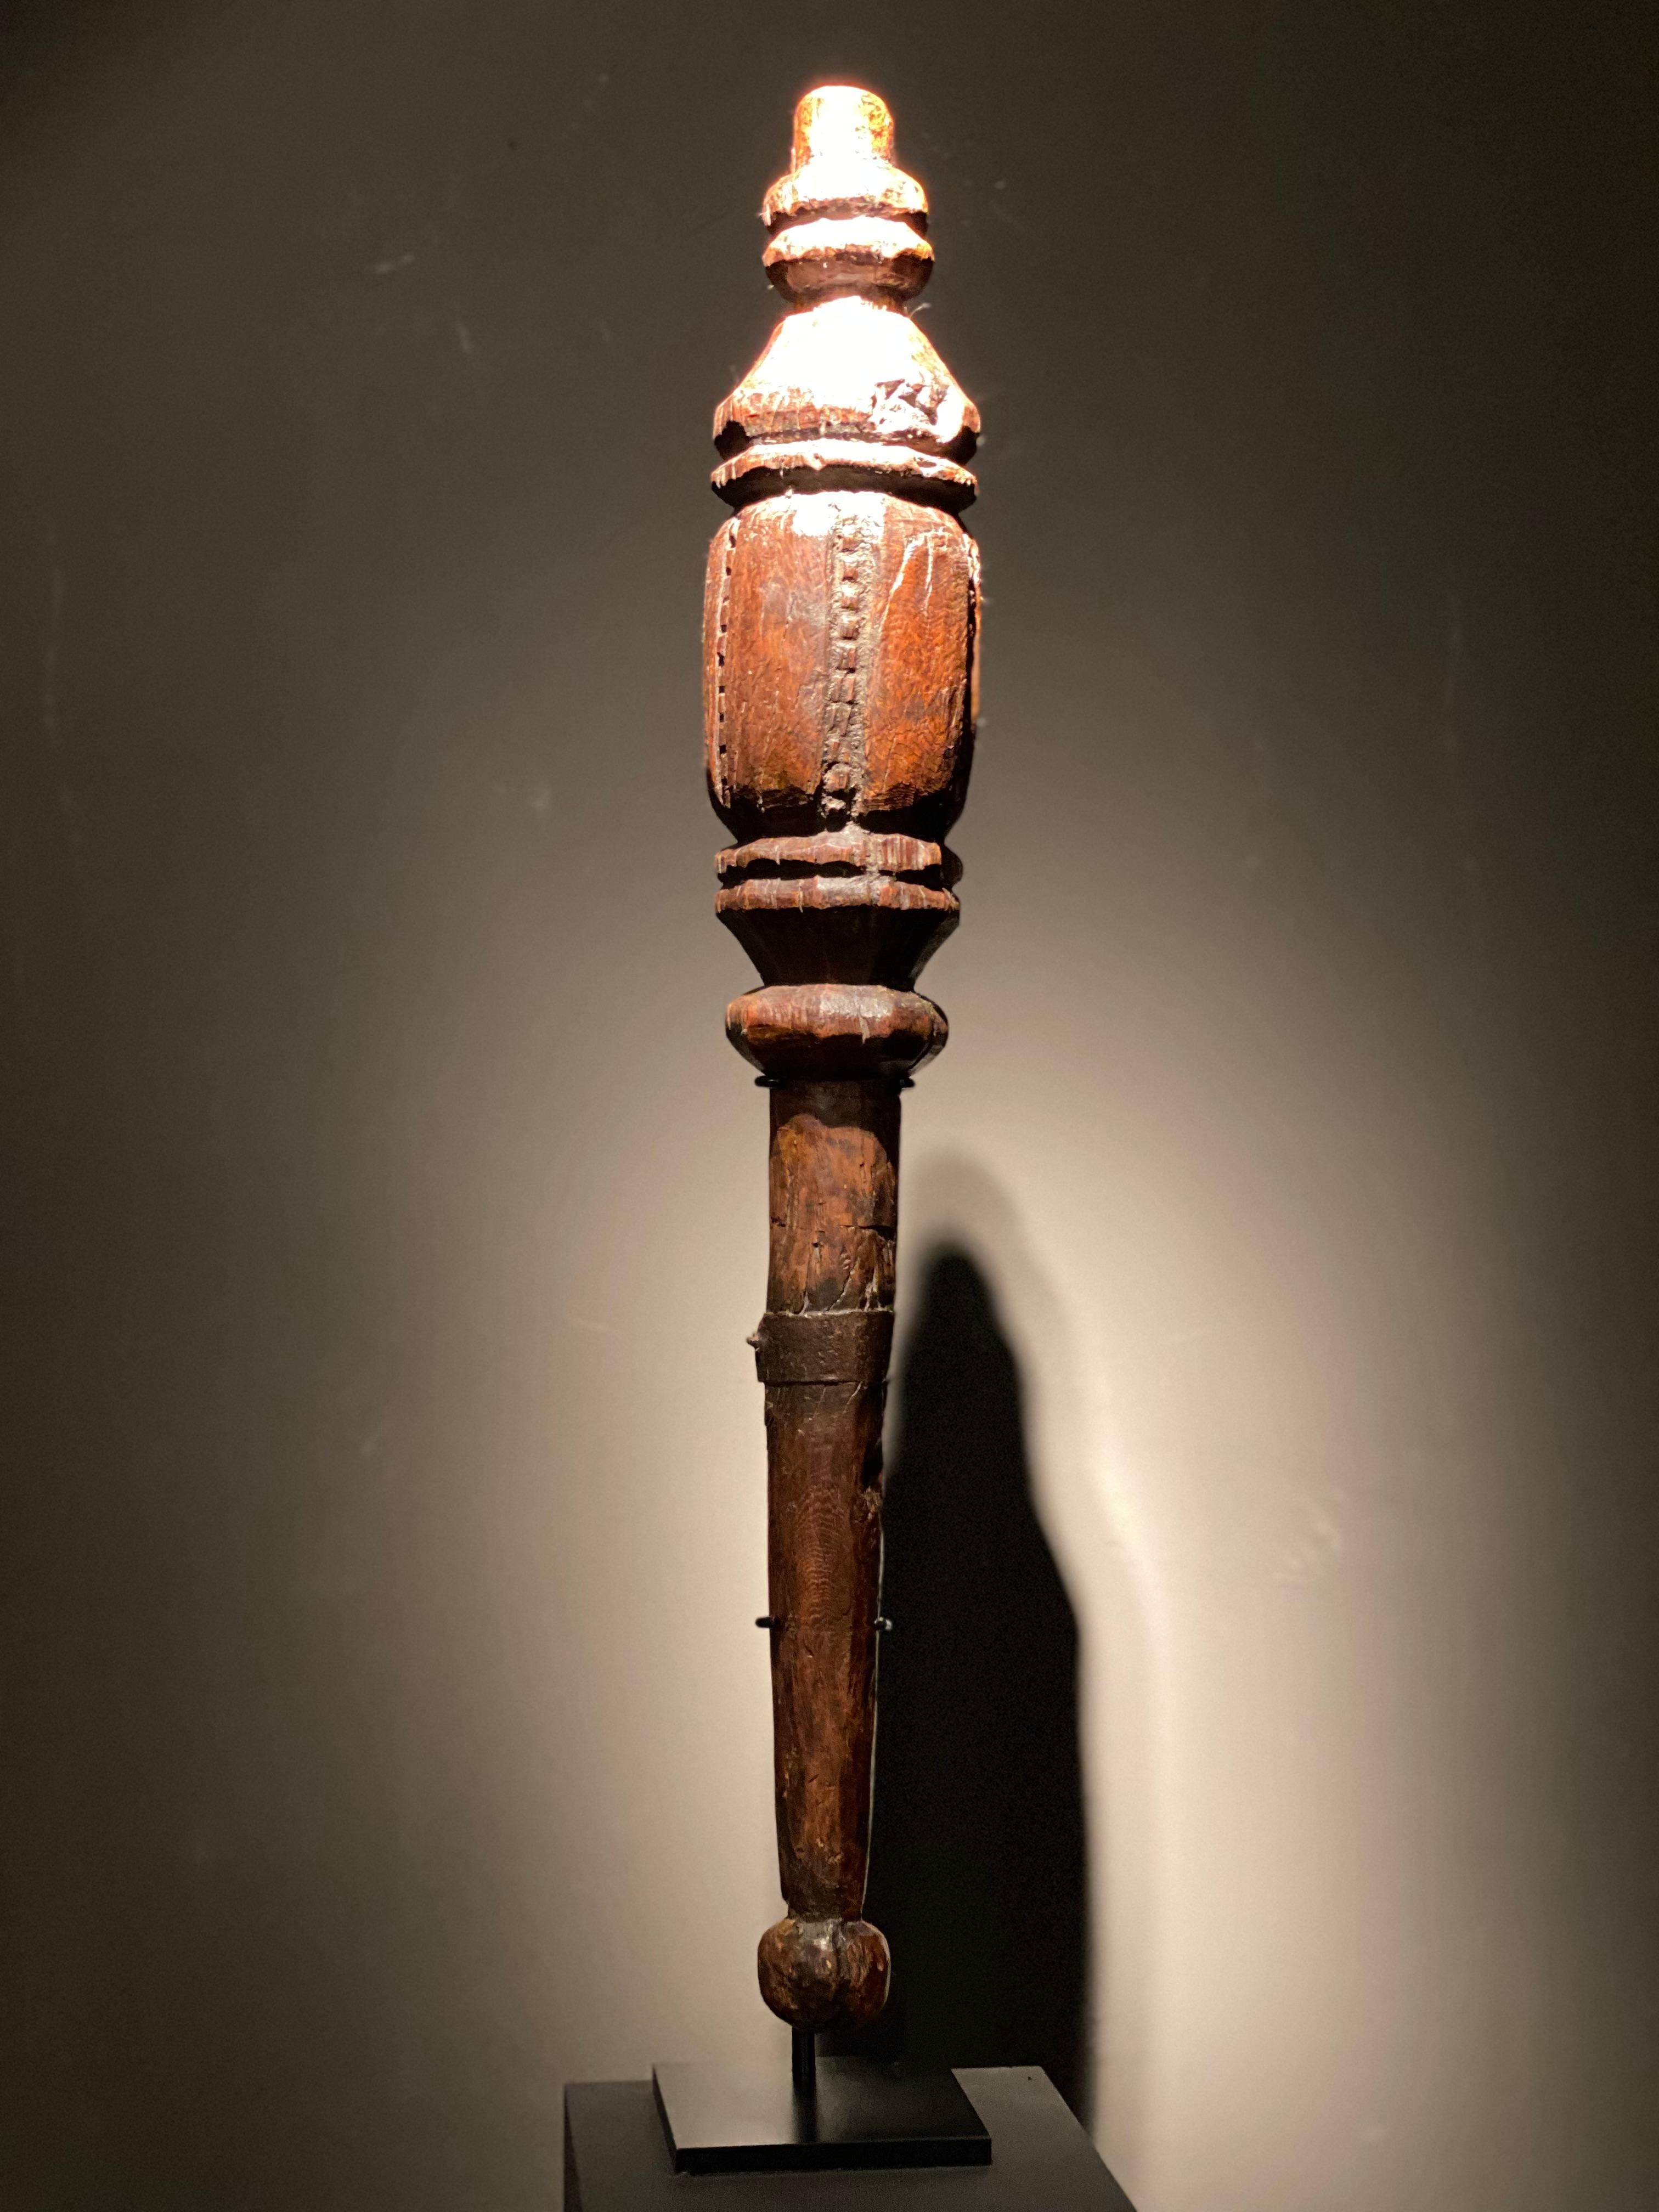 Exceptional wooden club from Italy,The Vatican,18 th Century
Used by the Guardians of The Pope to protect and as a Ceremonial object,
Good, great old patina,
Mounted on an iron stand.